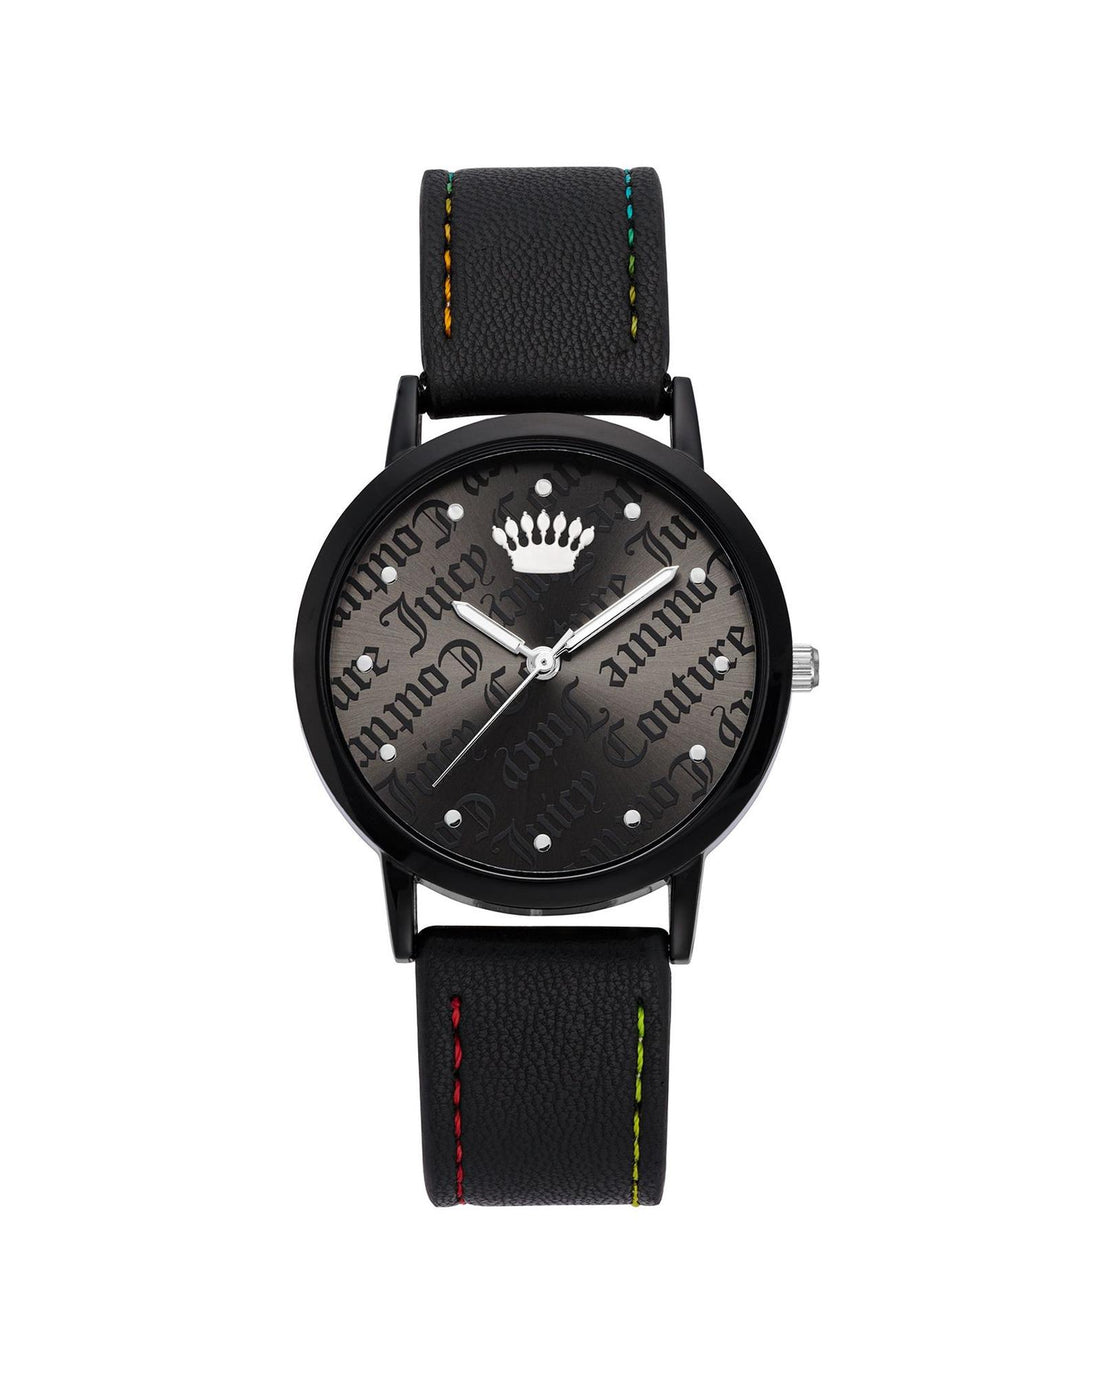 Black Leatherette Analog Fashion Watch with Pin Buckle Closure One Size Women-Women&